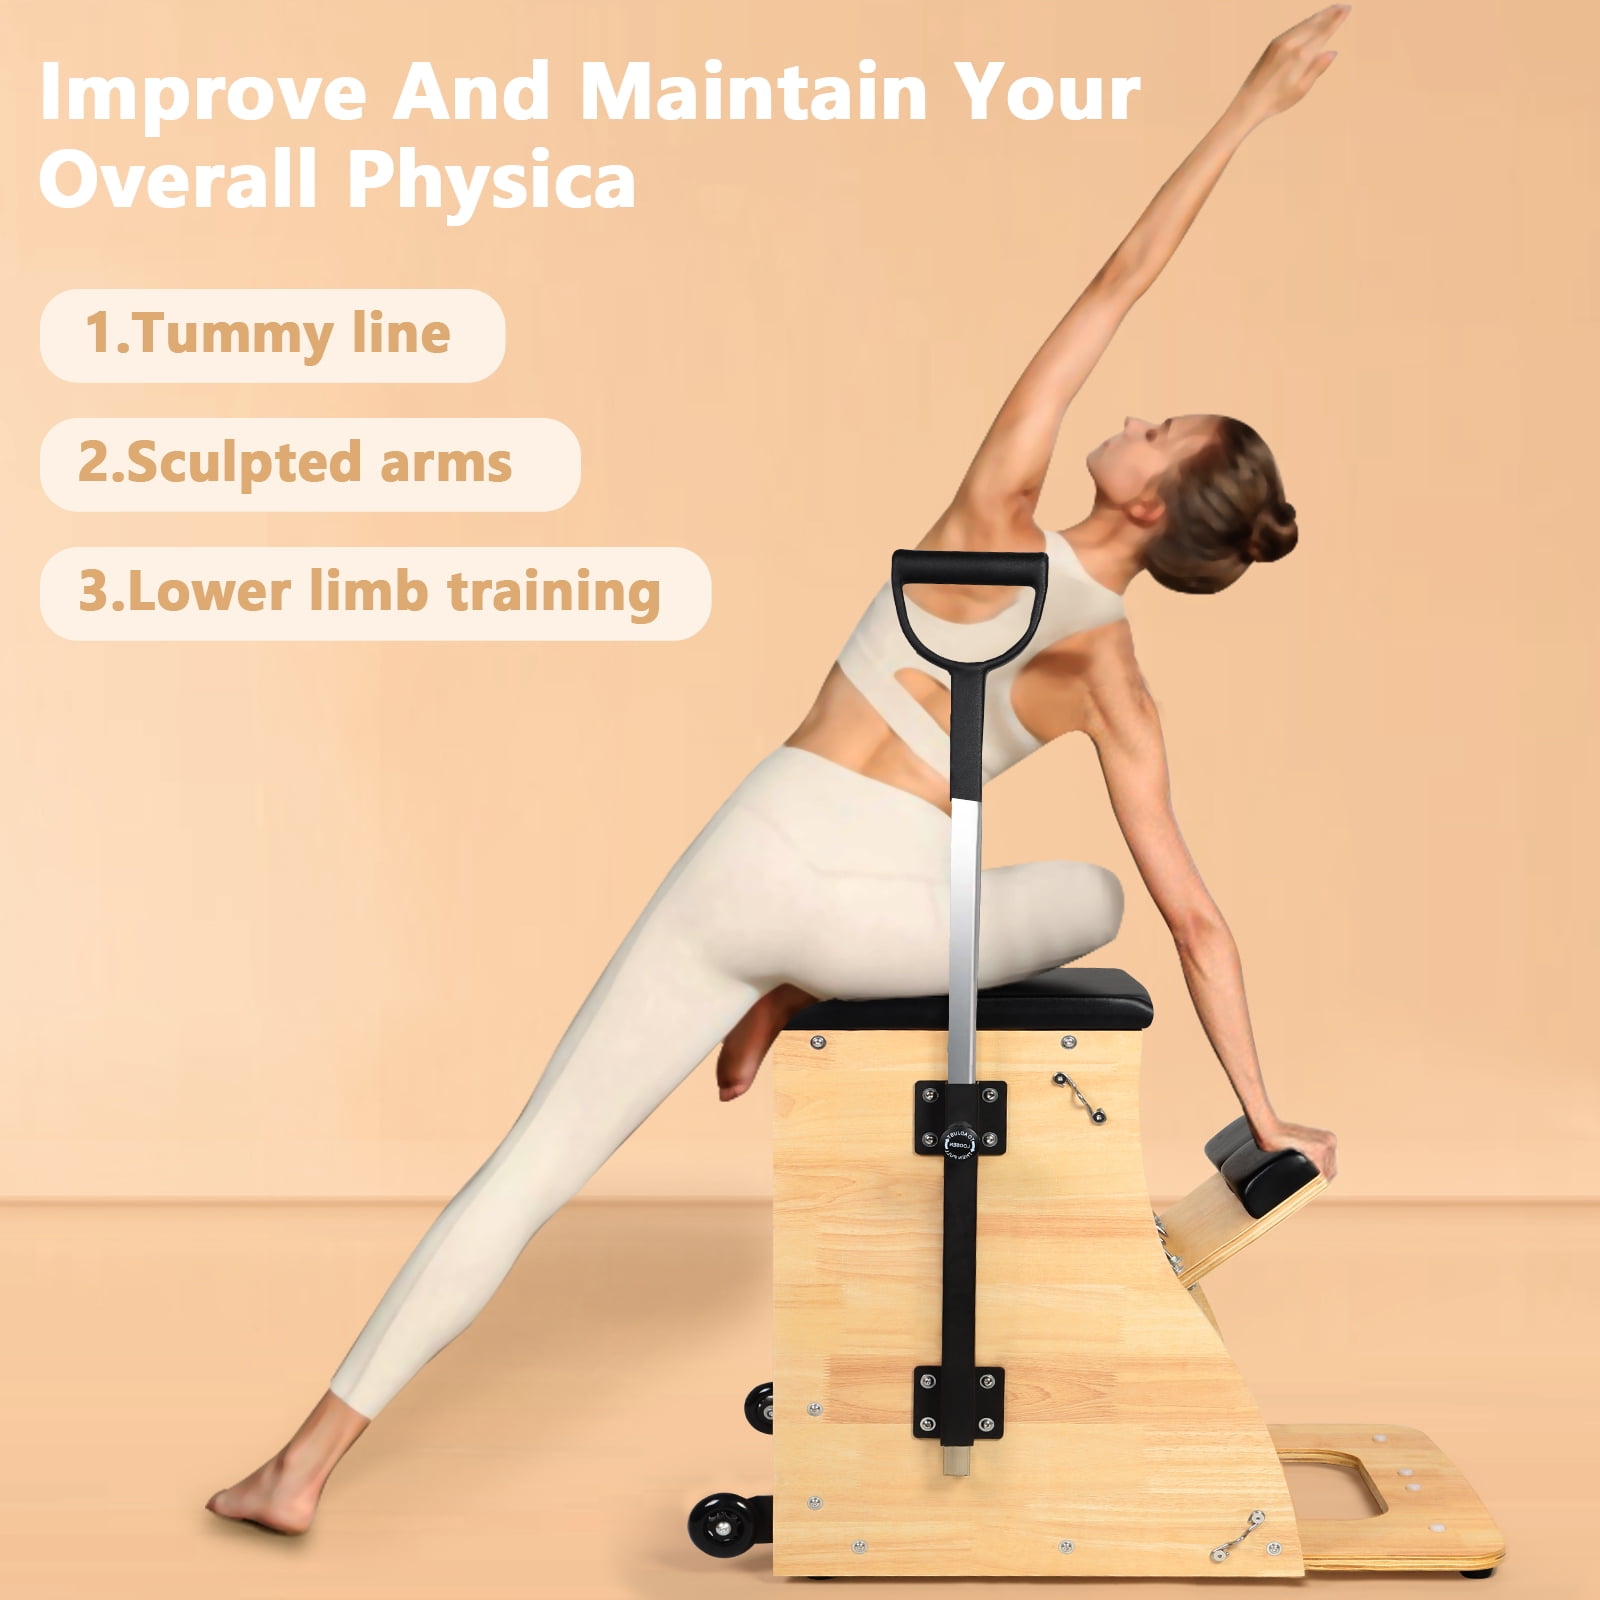 ARKANTOS Pilates Springboard, Exercise Equipment for The Home